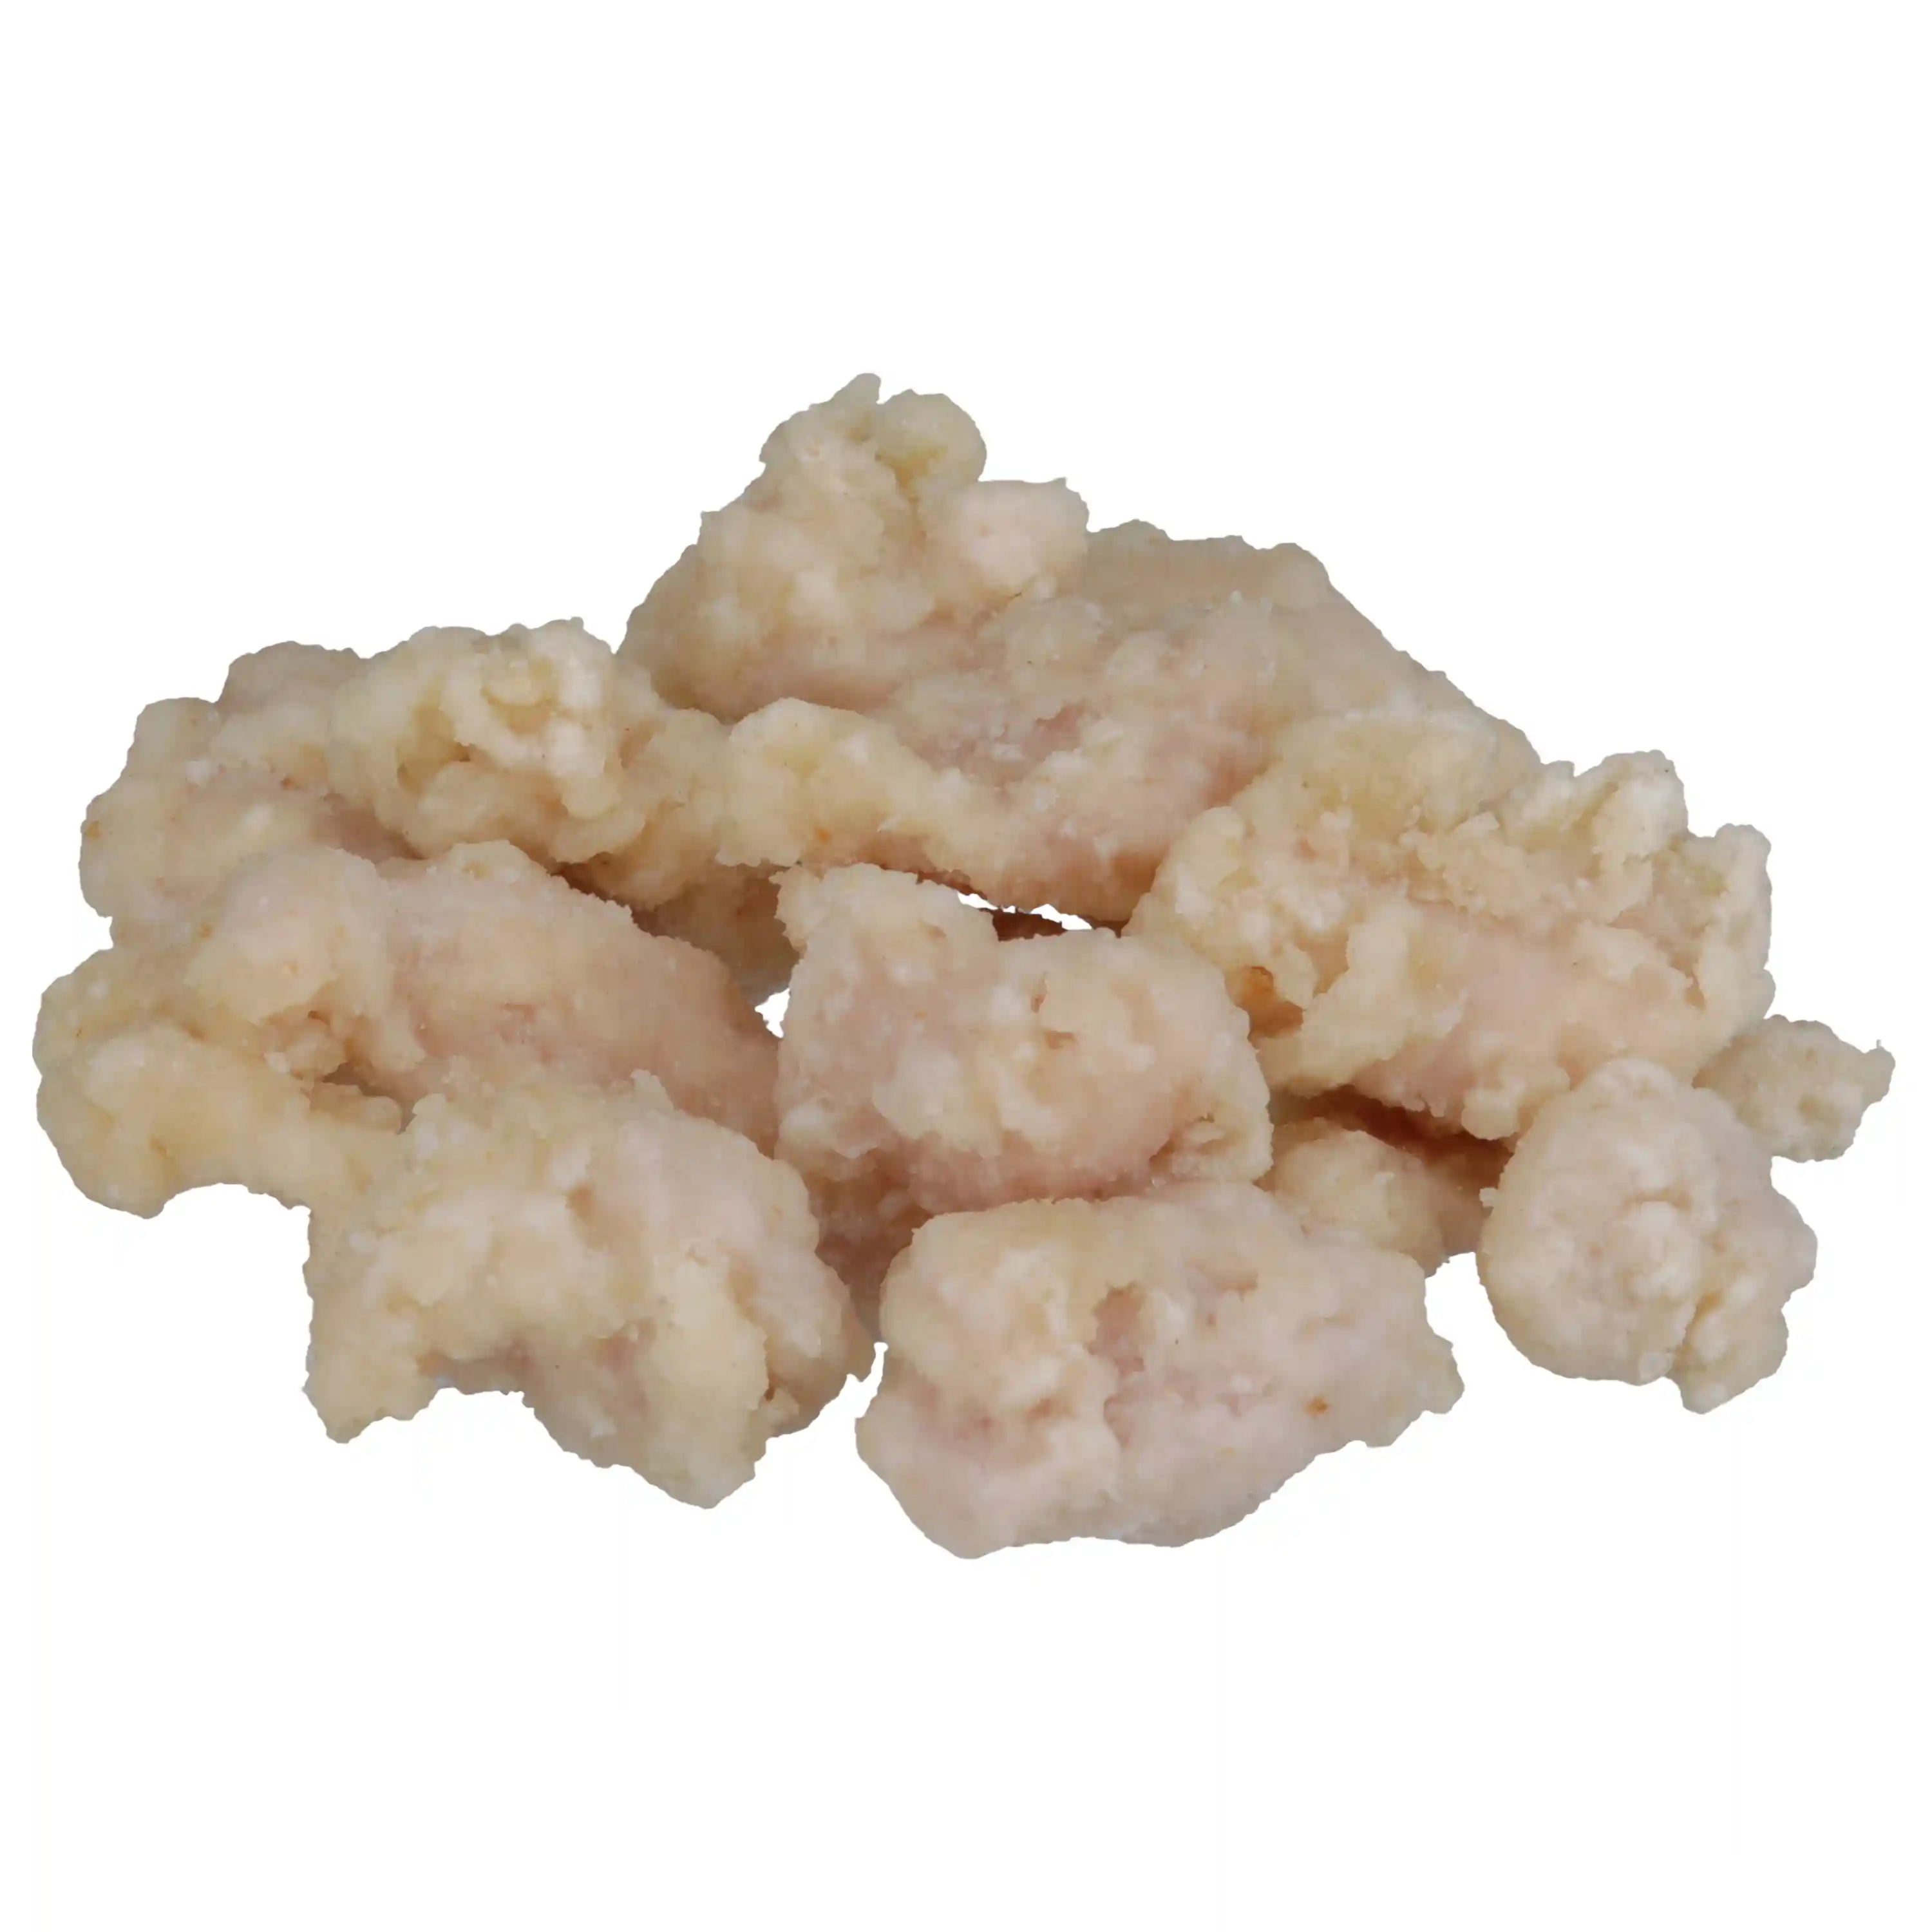 Tyson® Uncooked All Natural* Battered Chicken Pieces_image_11